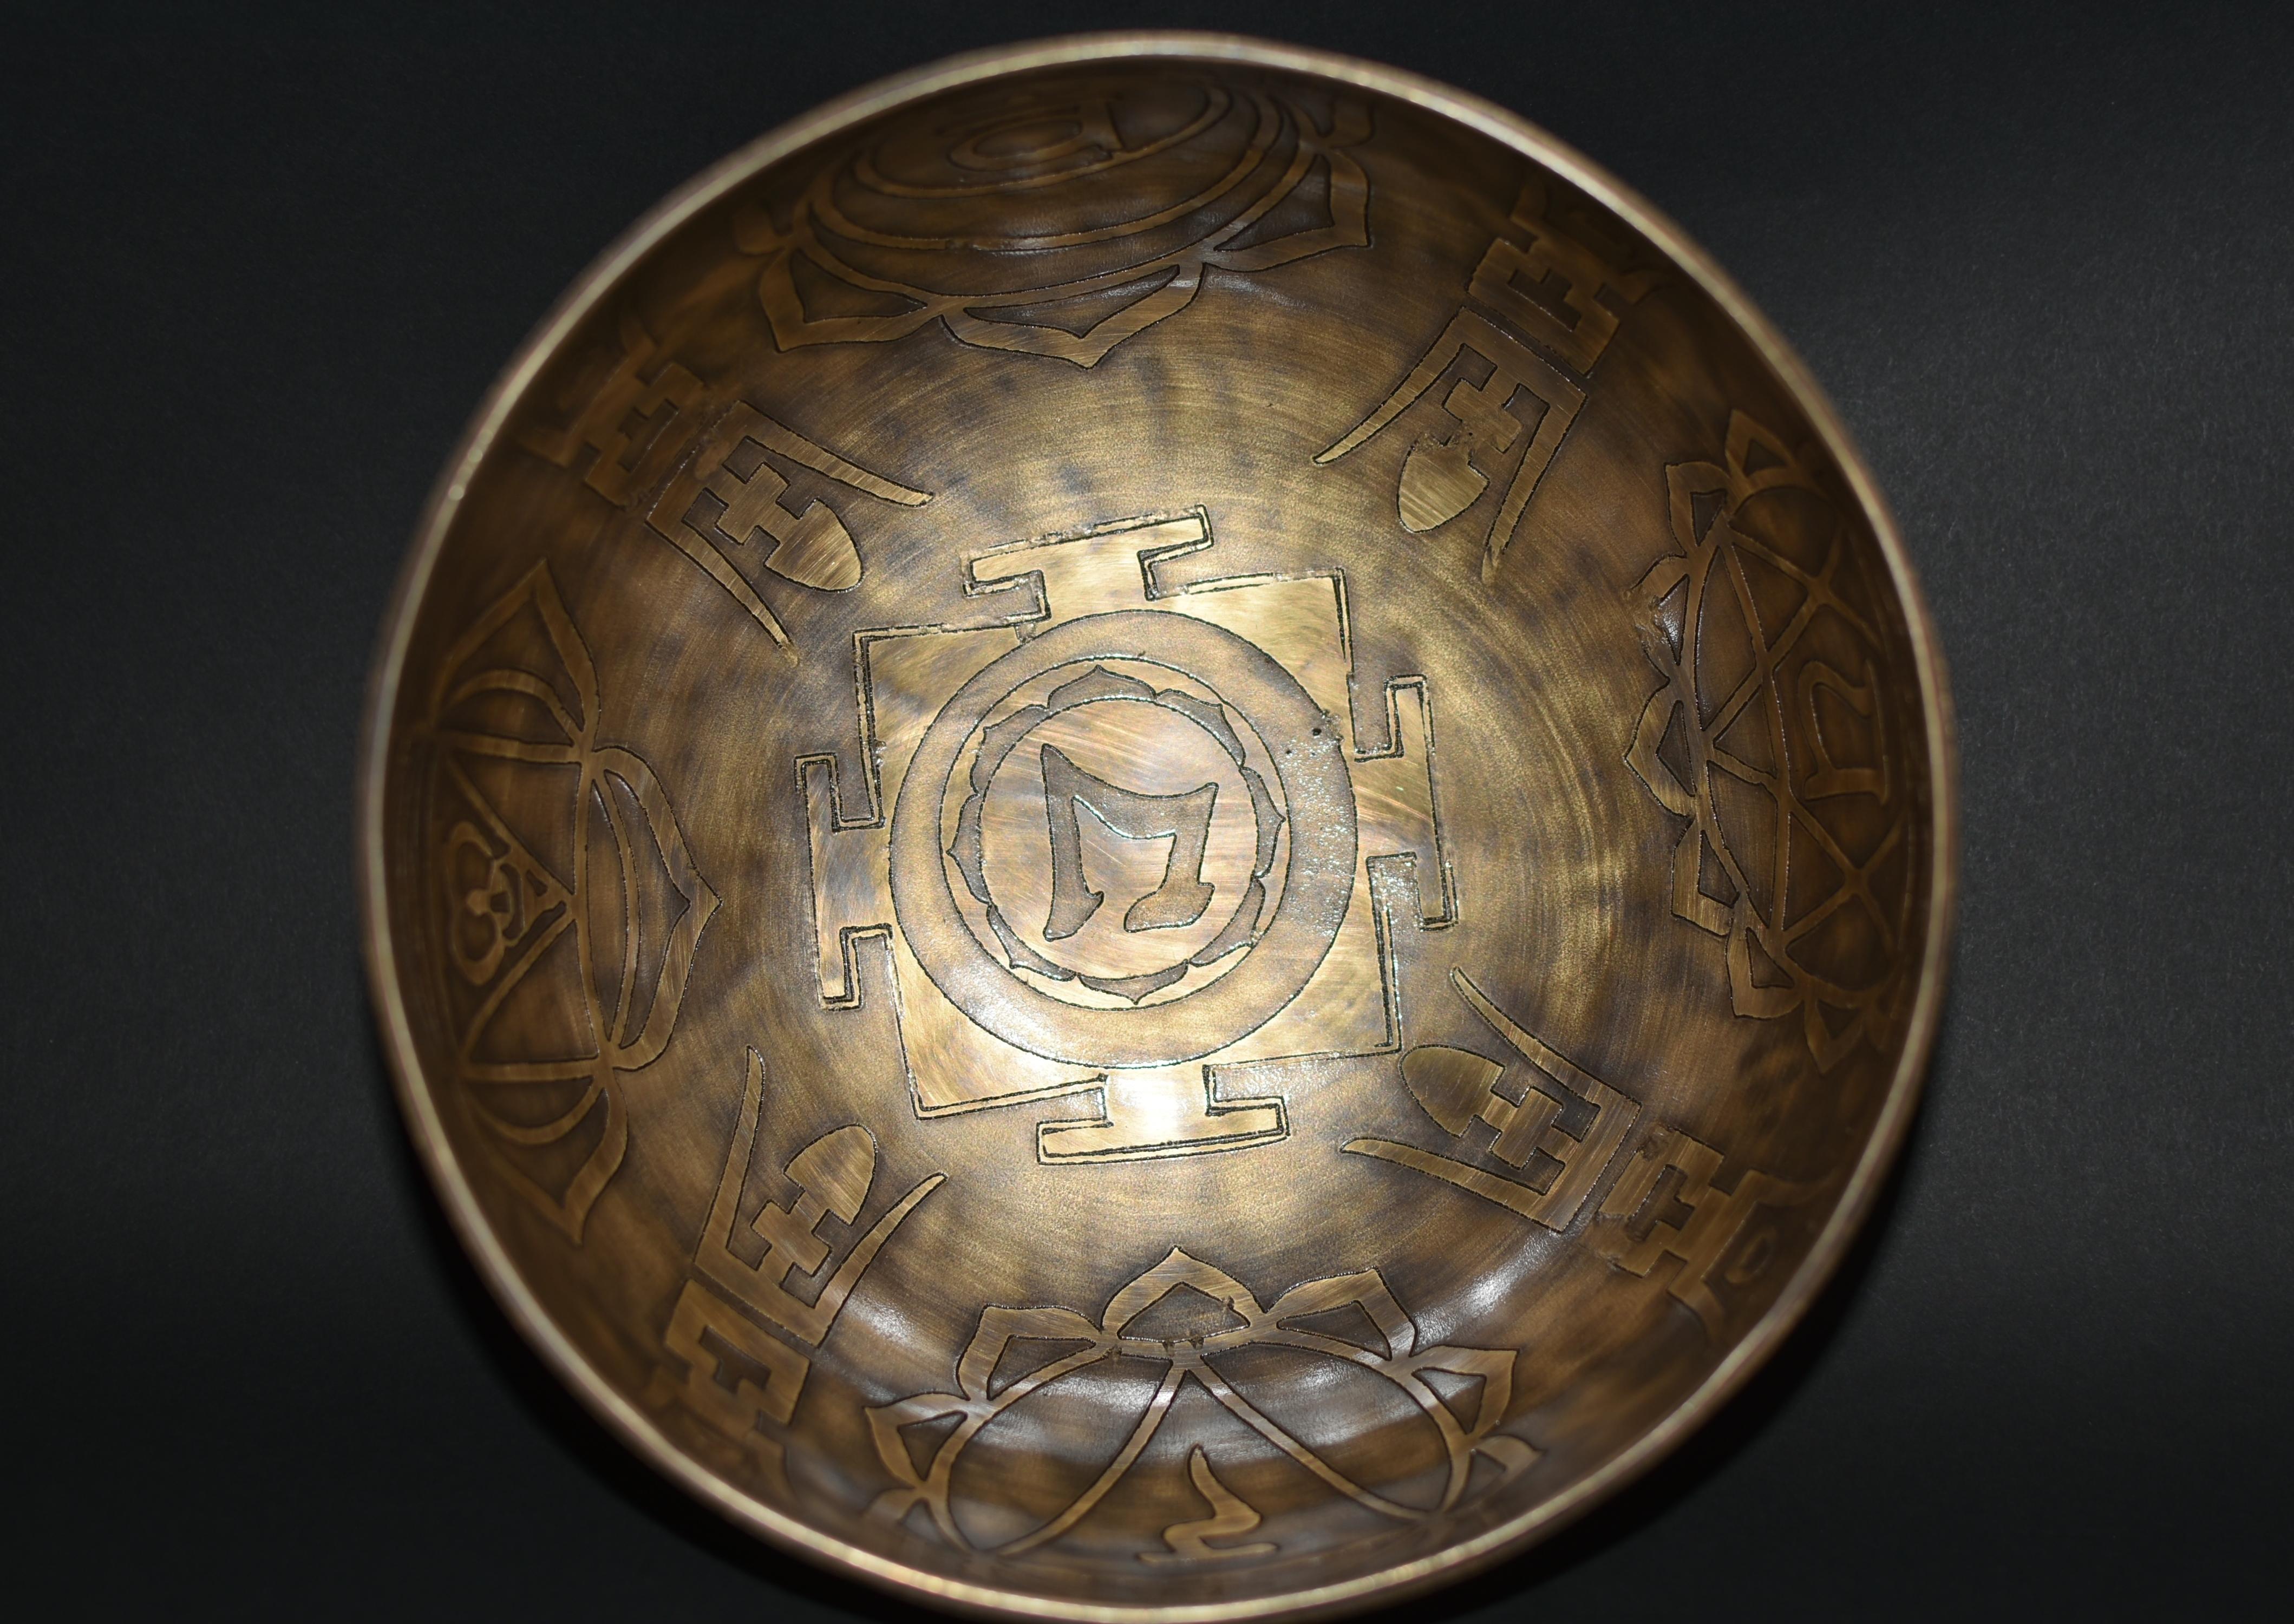 A beautiful, fully engraved and inlaid singing bowl made by the spiritual craftsmen of Nepal. The interior depicts a center square surrounded by four longevity characters and open lotus blooms. The exterior features rings of holy fires and royal